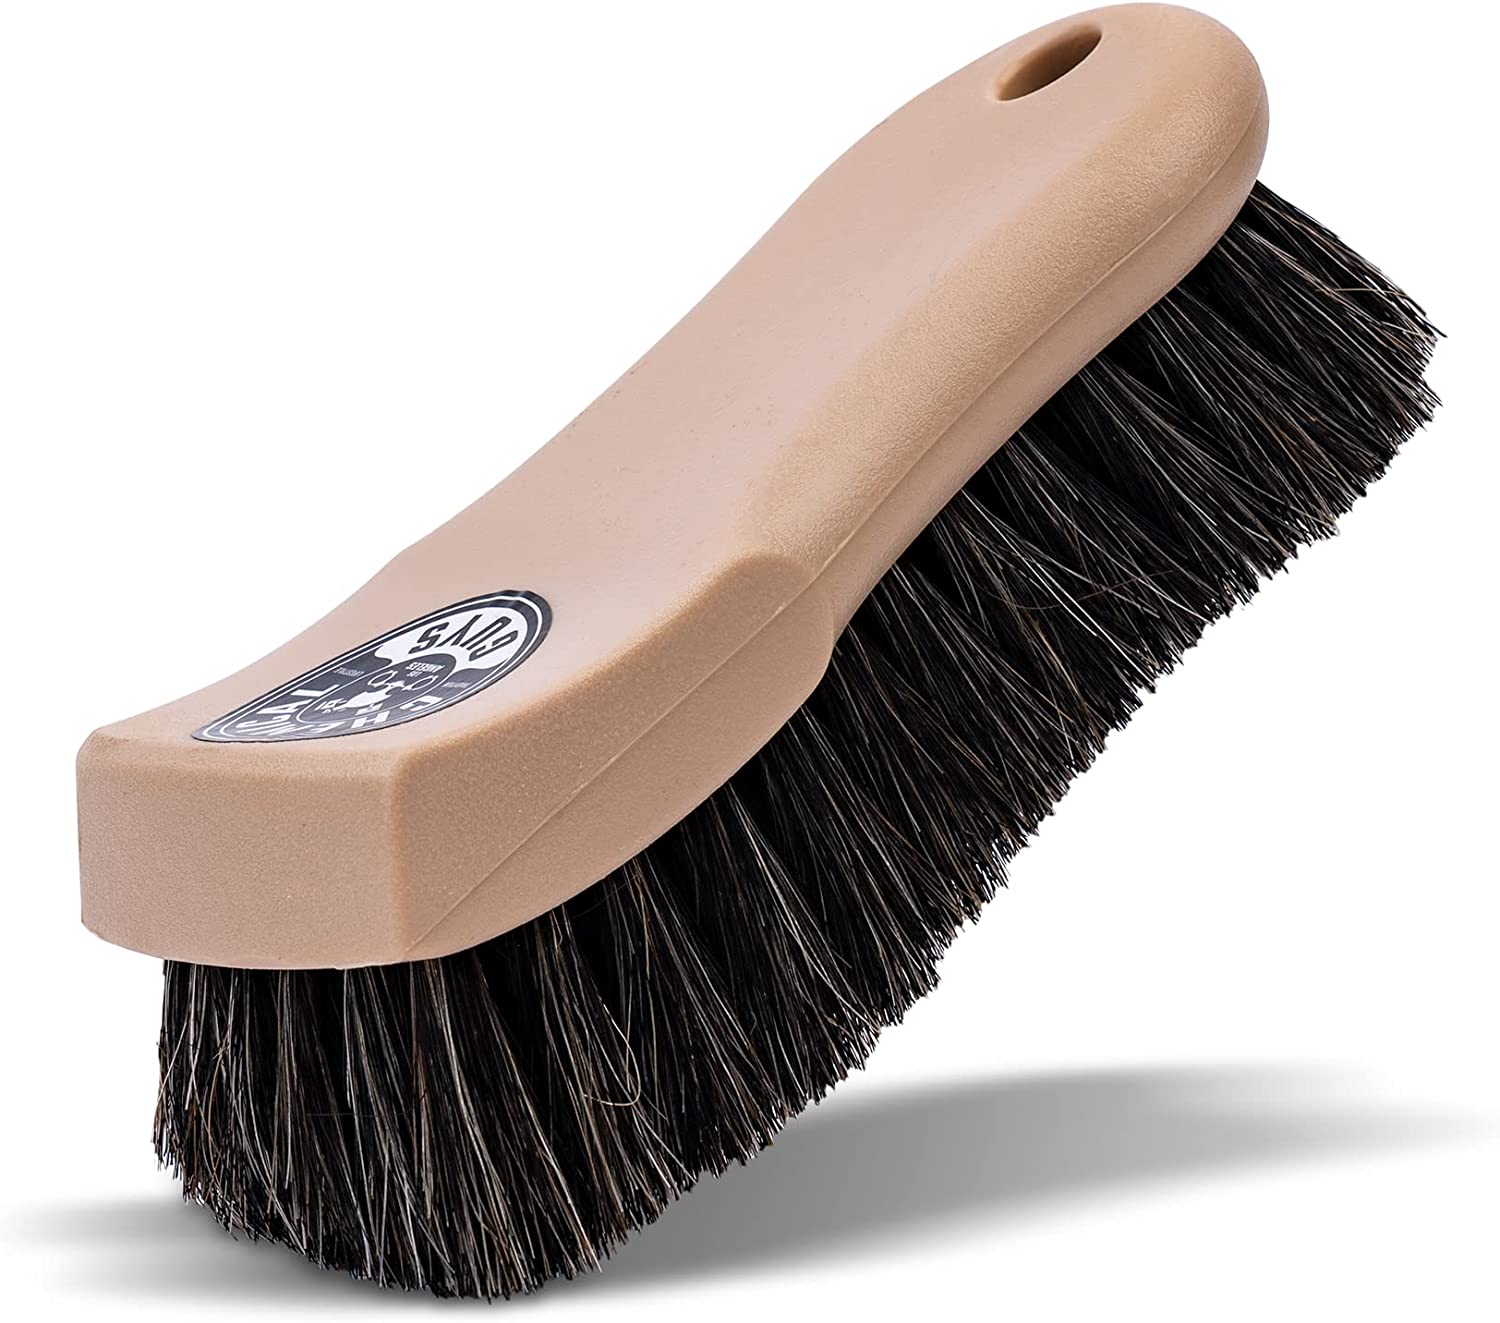 The Best Horsehair Brush | Reviews, Ratings, Comparisons